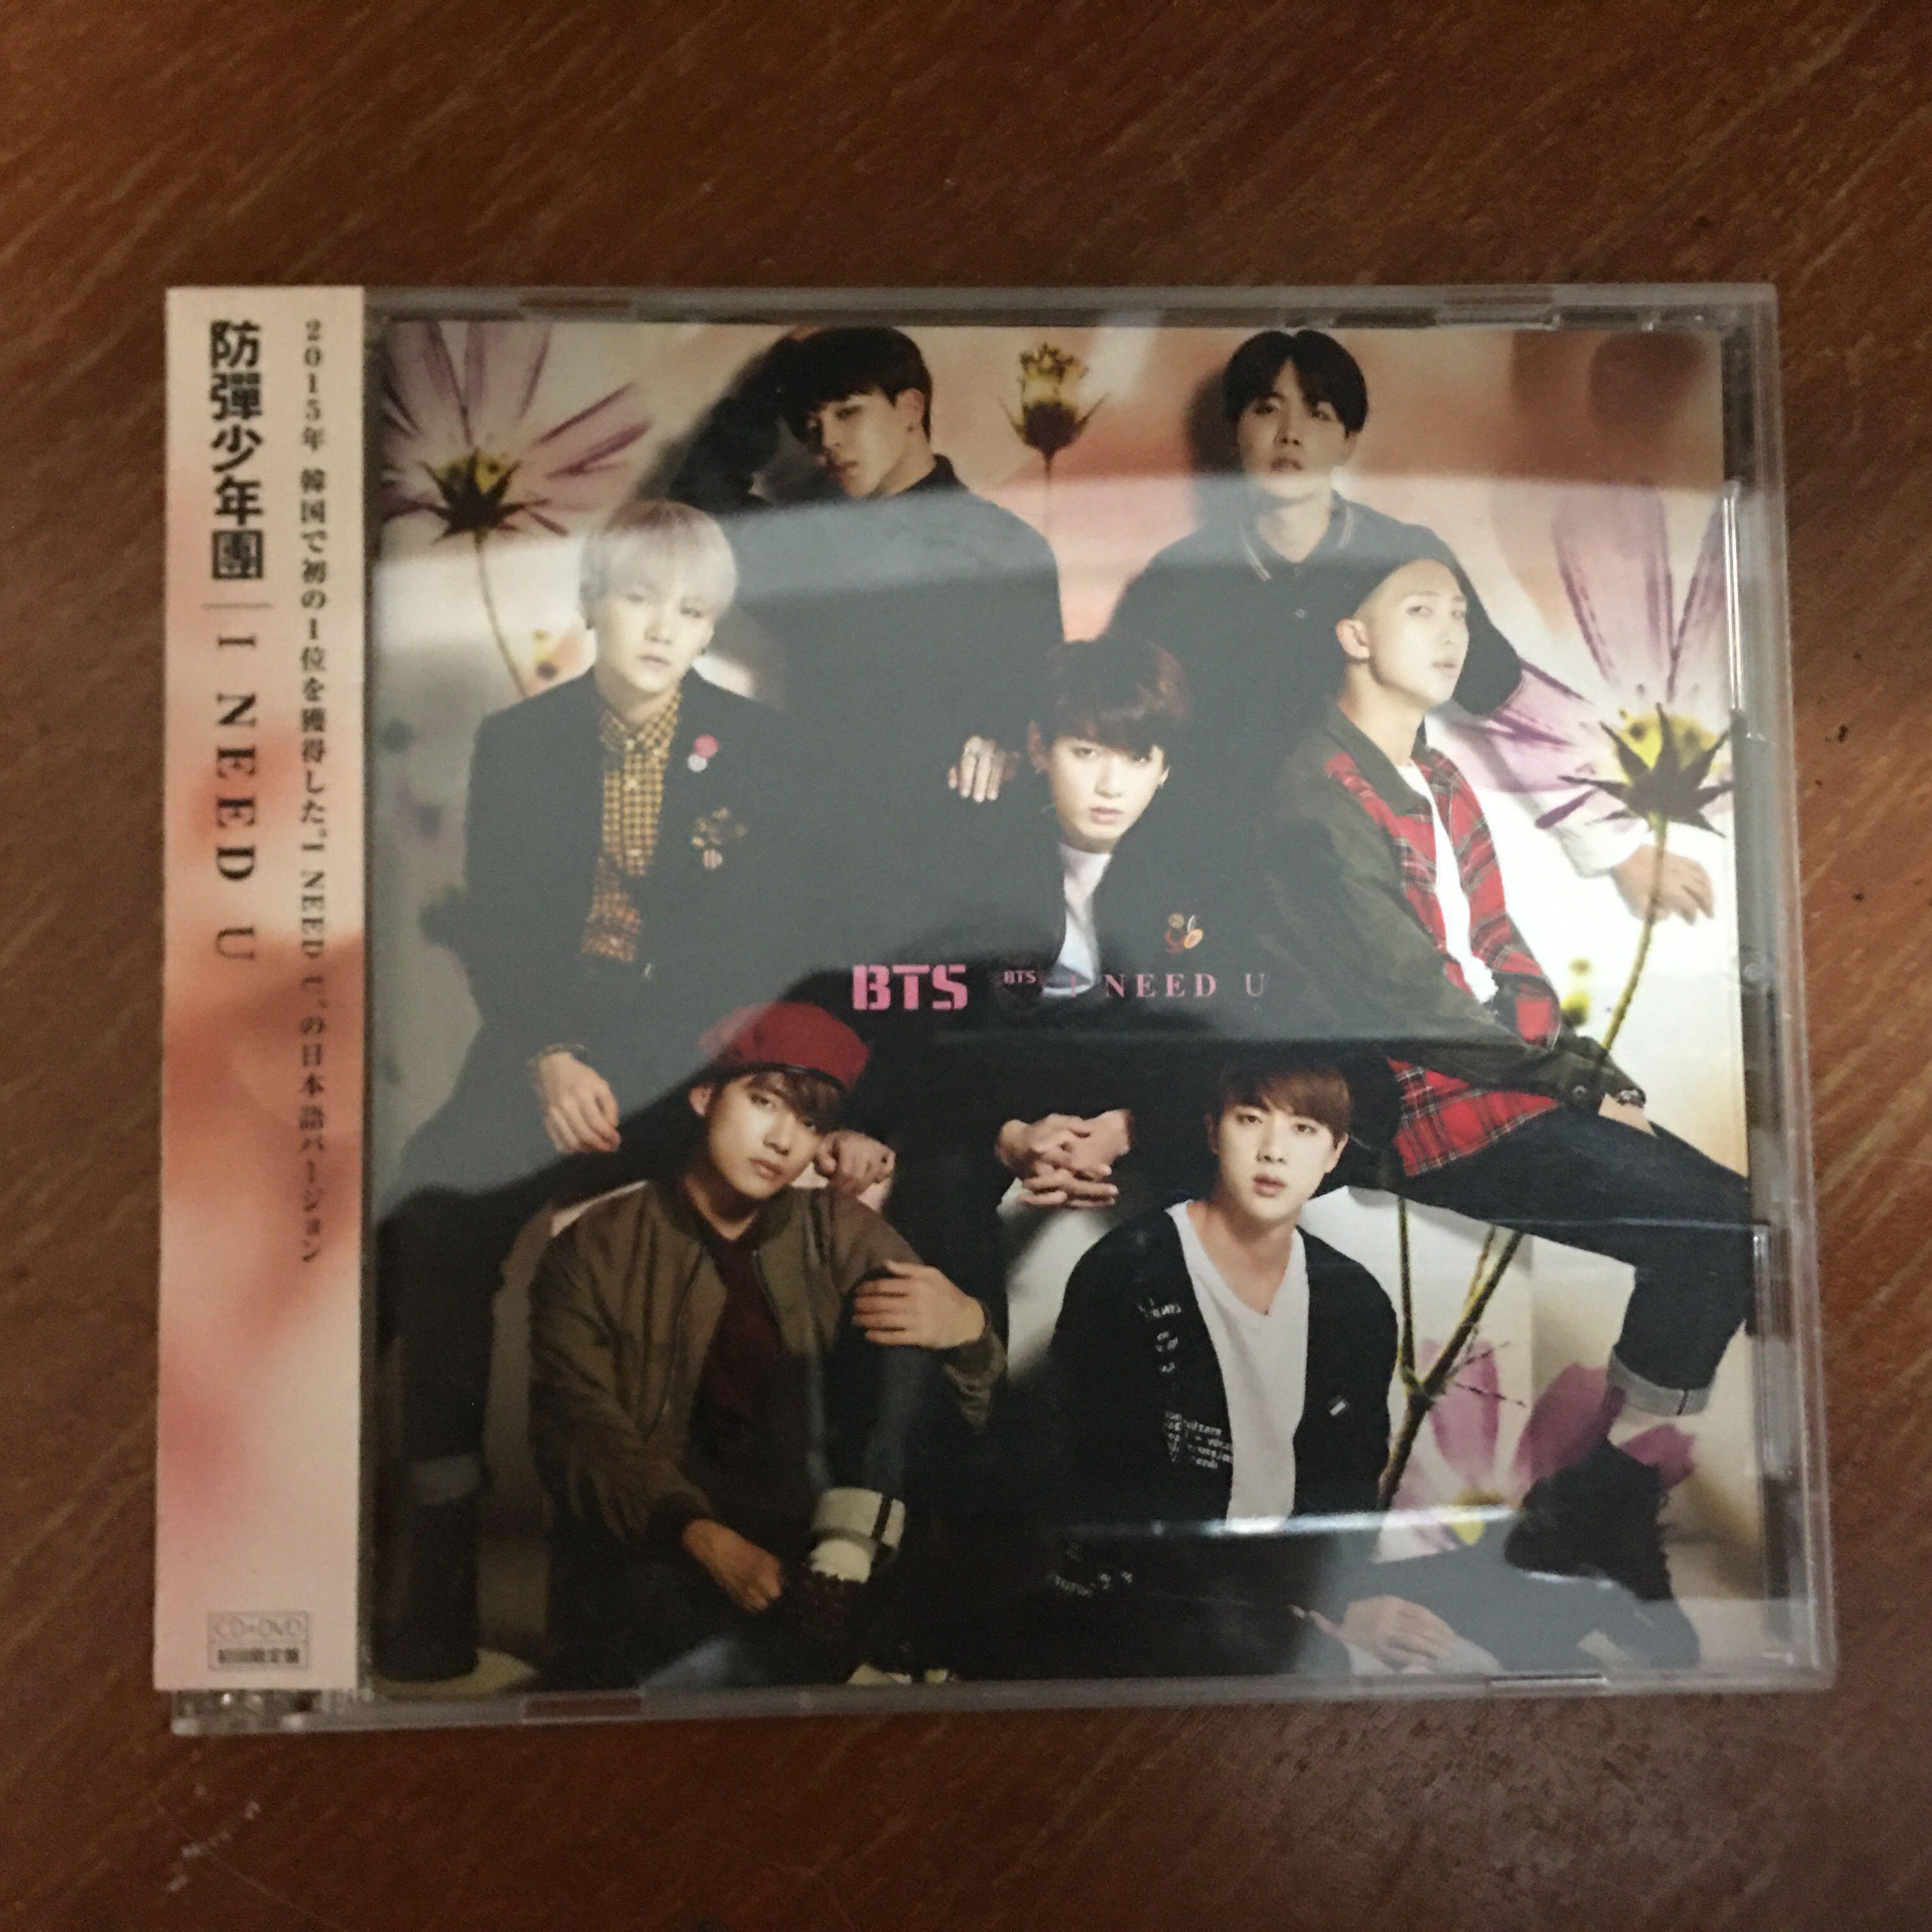 Wts Lfb Bts Japanese I Need U Limited Edition Cd Dvd K Wave On Carousell